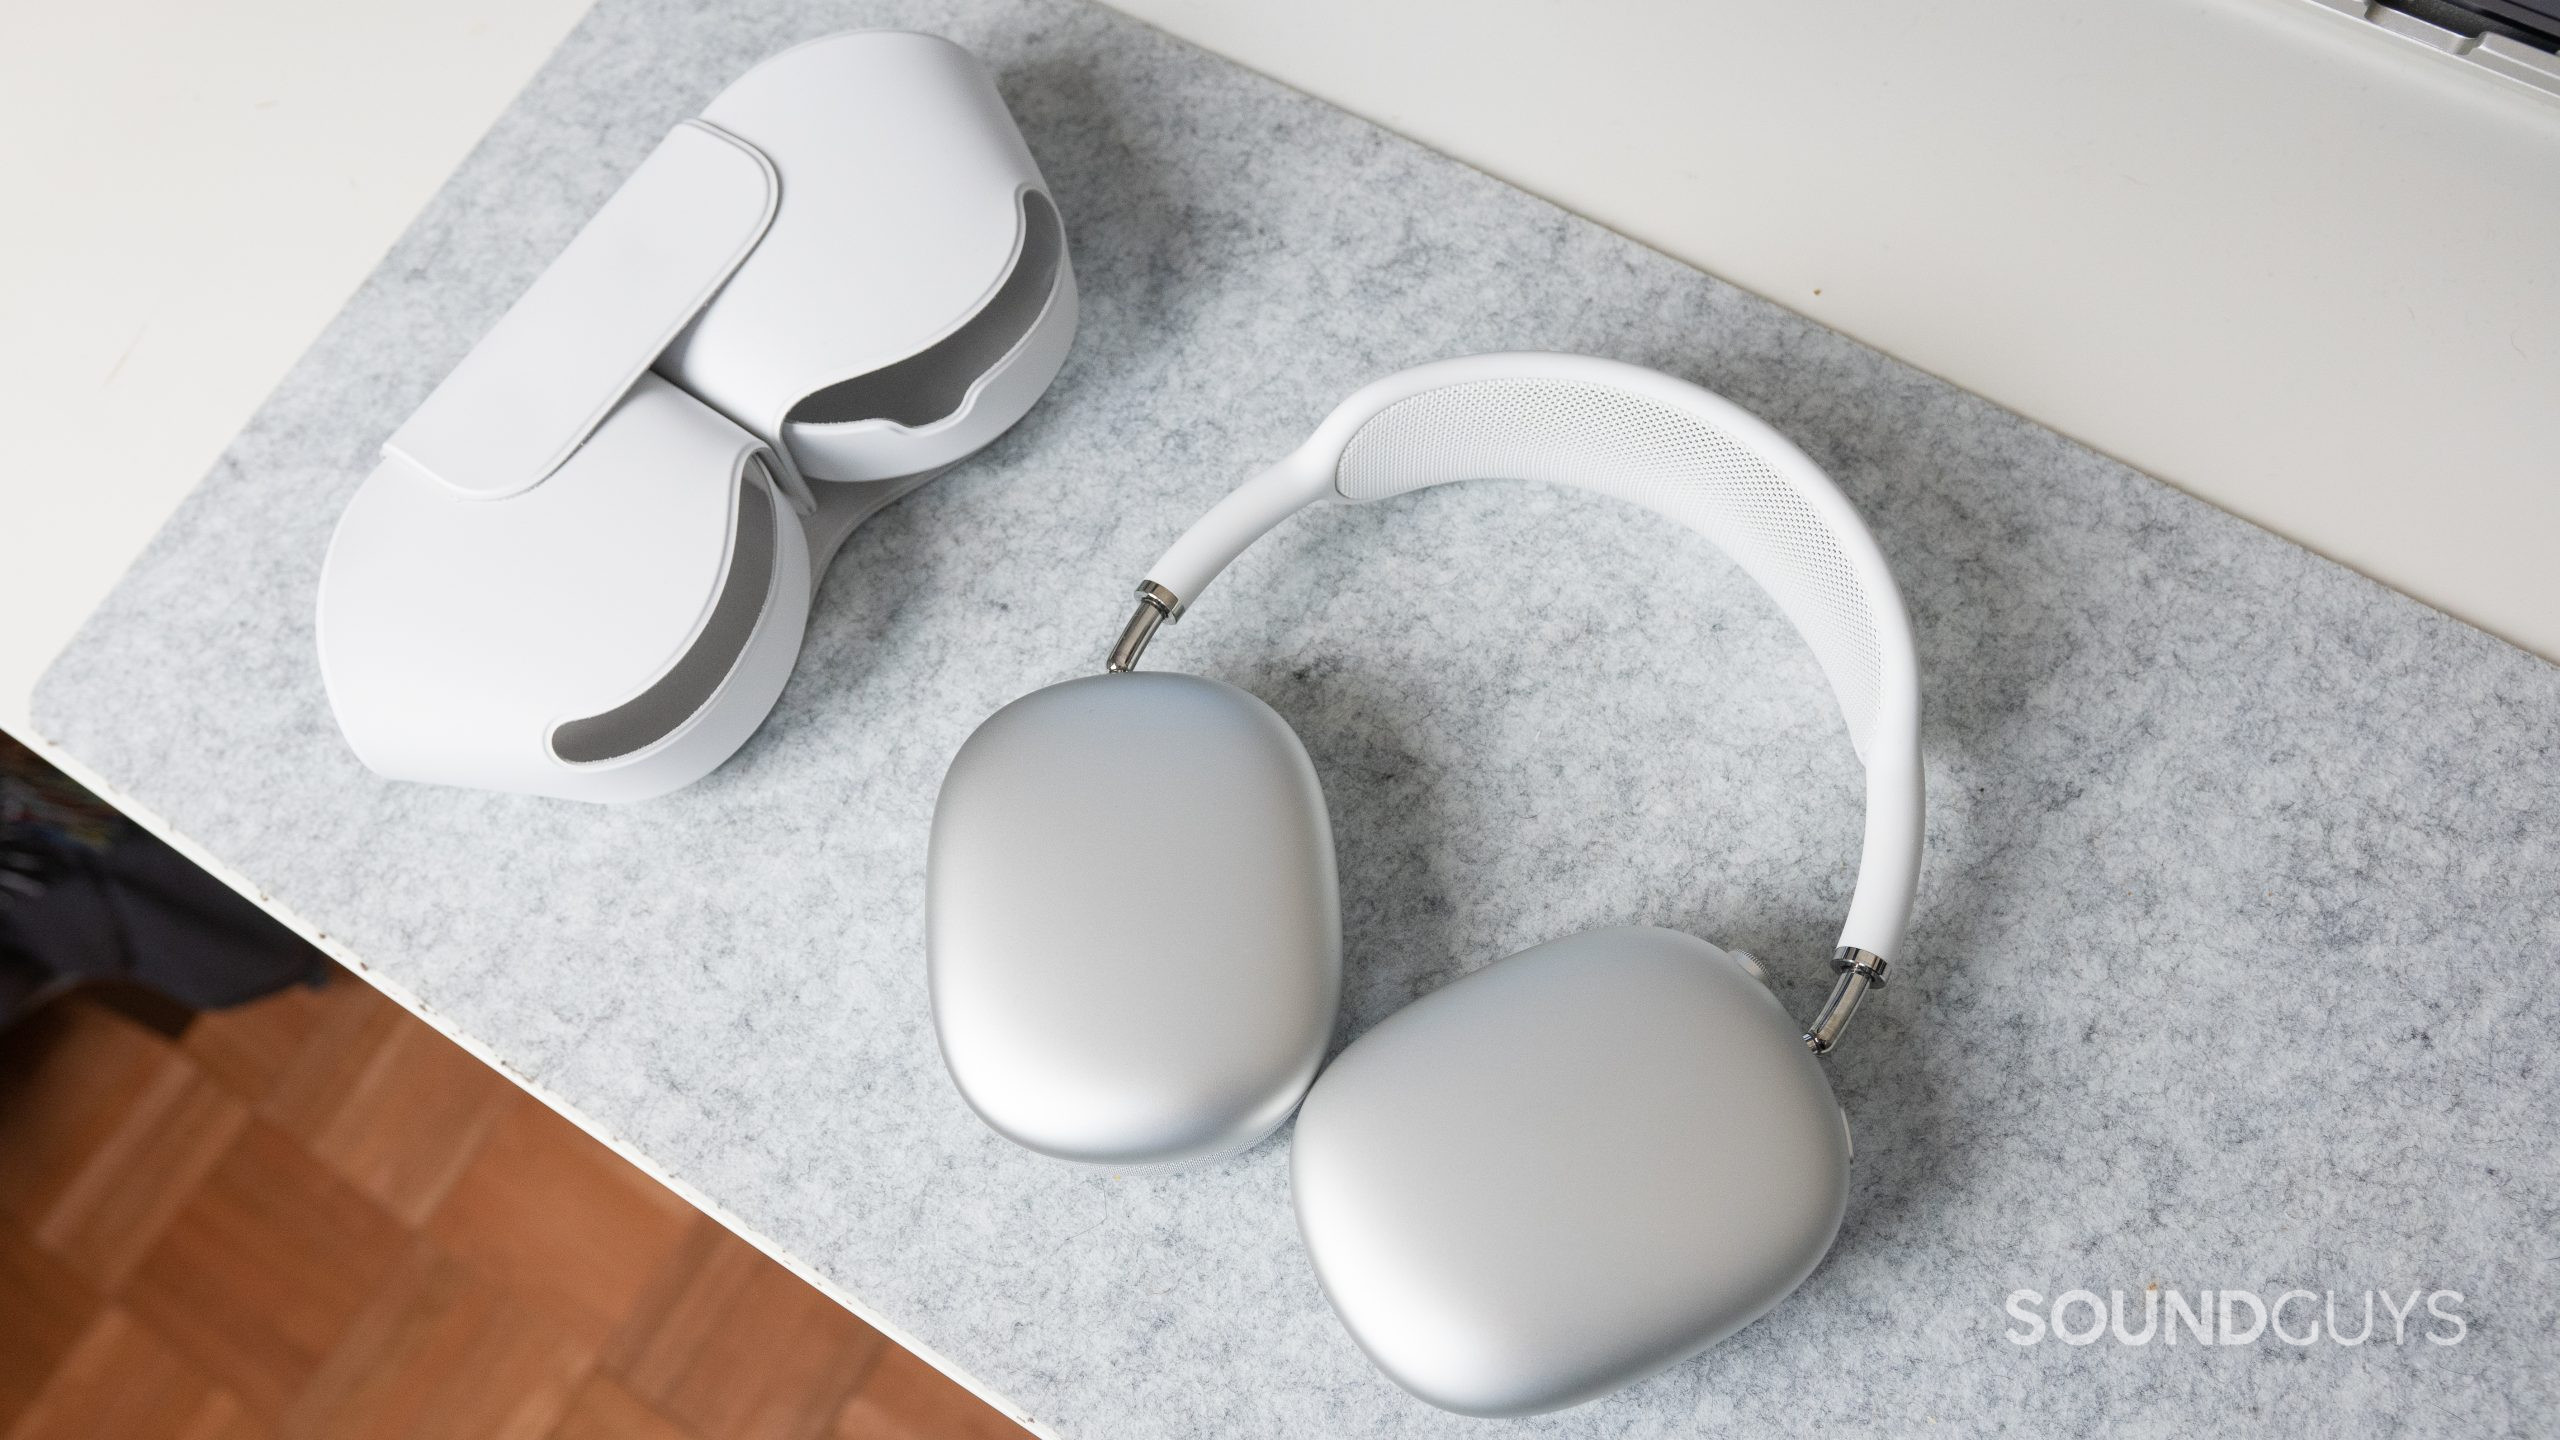 I test headphones for a living and this AirPods Max feature blew